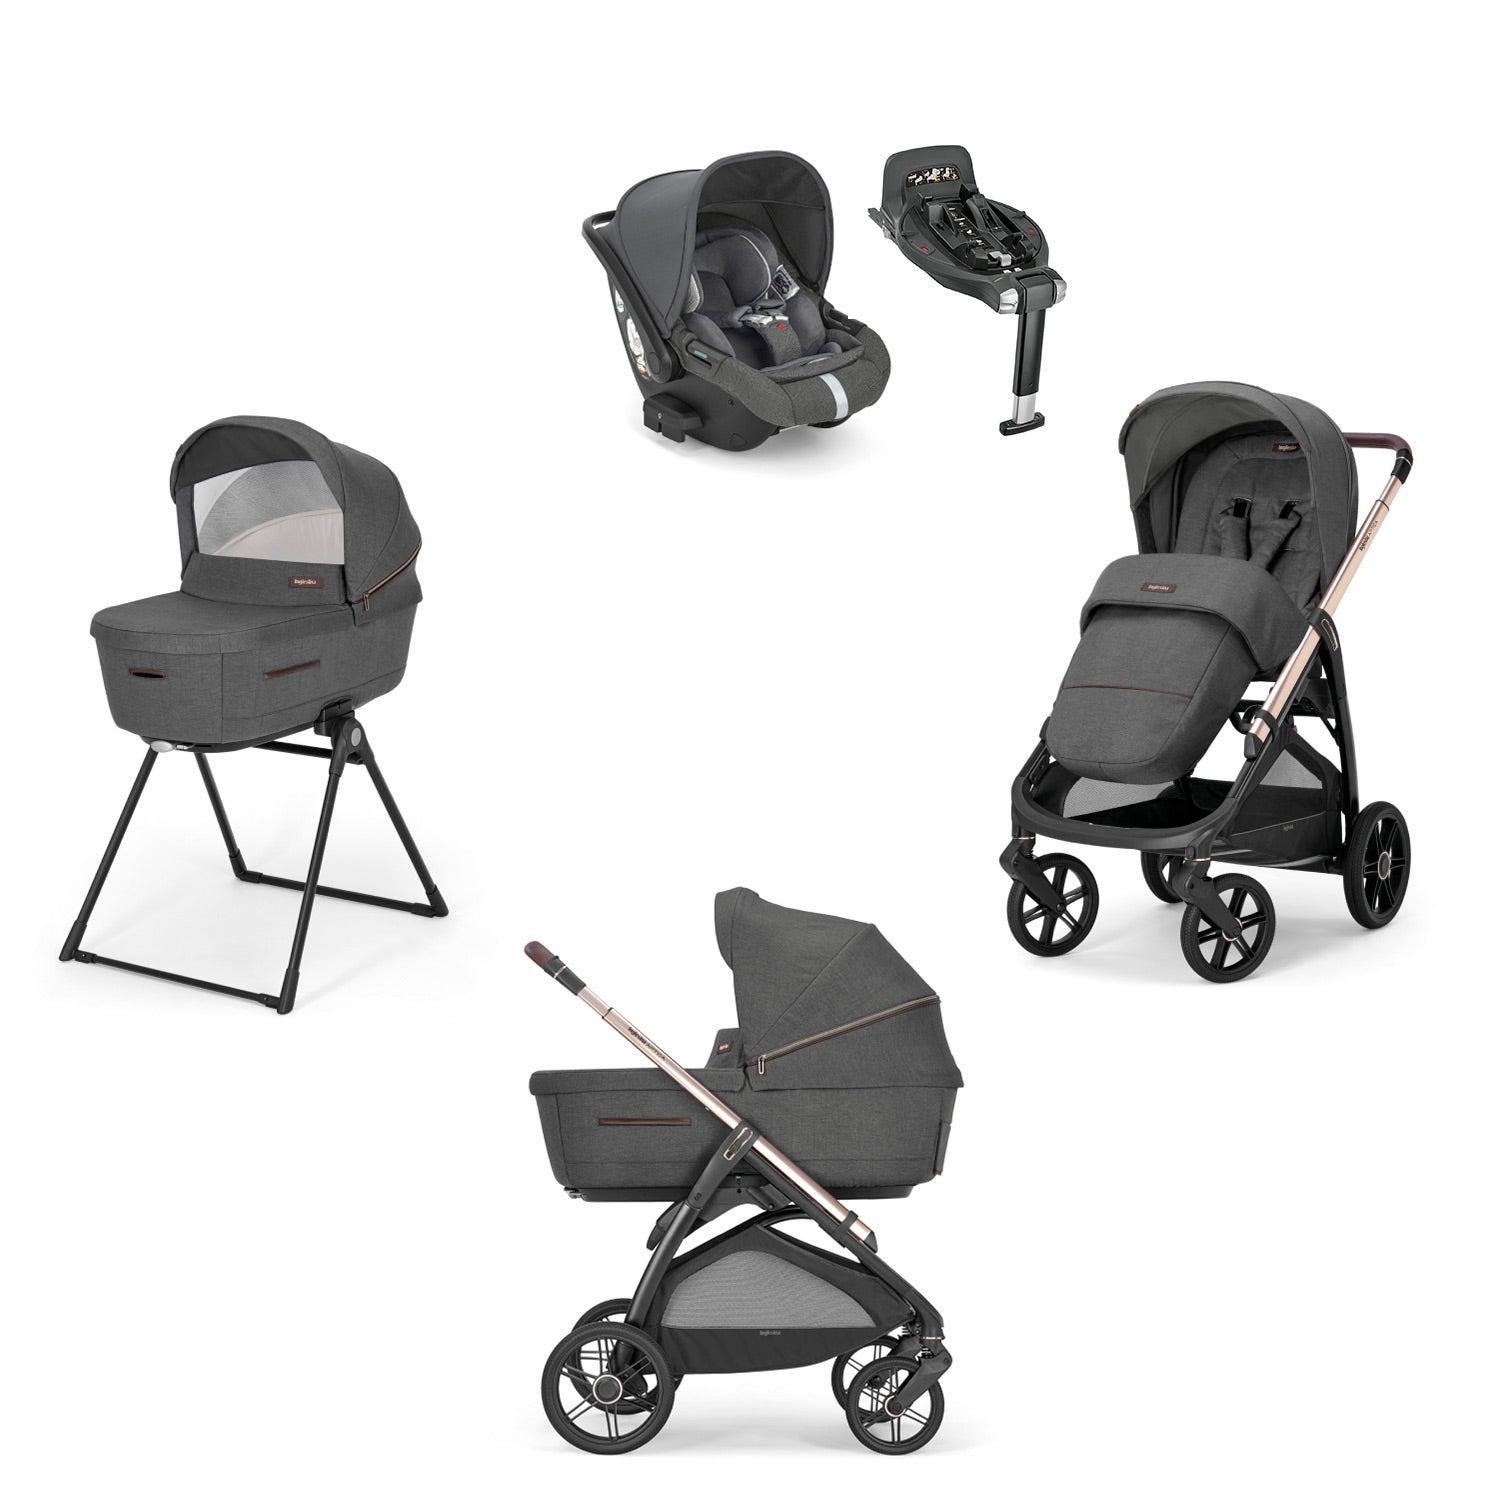 Image of Aptica System Velvet Grey Chassis Color Palladio car Seat Darwin Infant Recline and 360° I-size Base